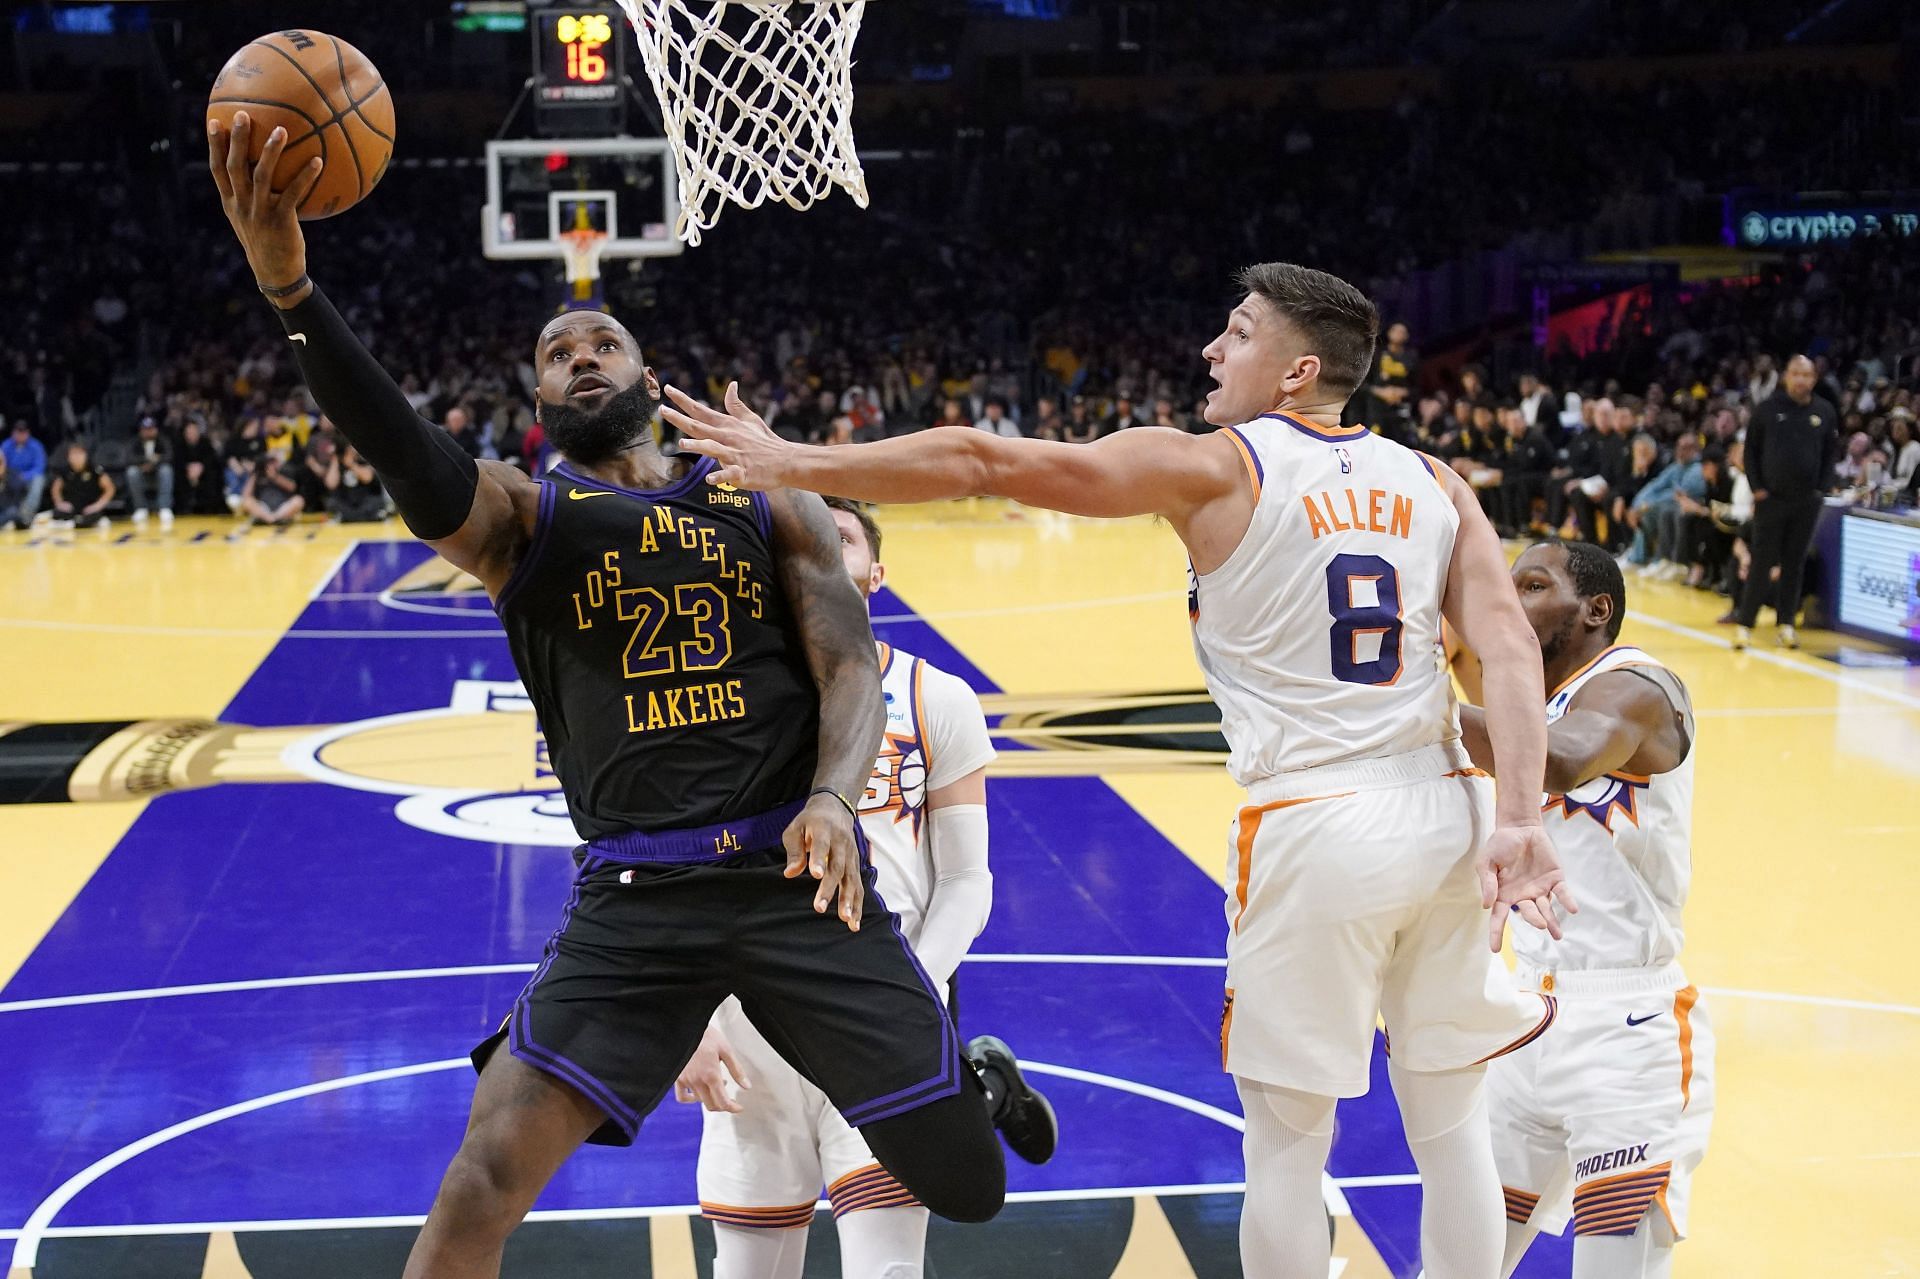 LeBron shines bright during the Suns-Lakers clash